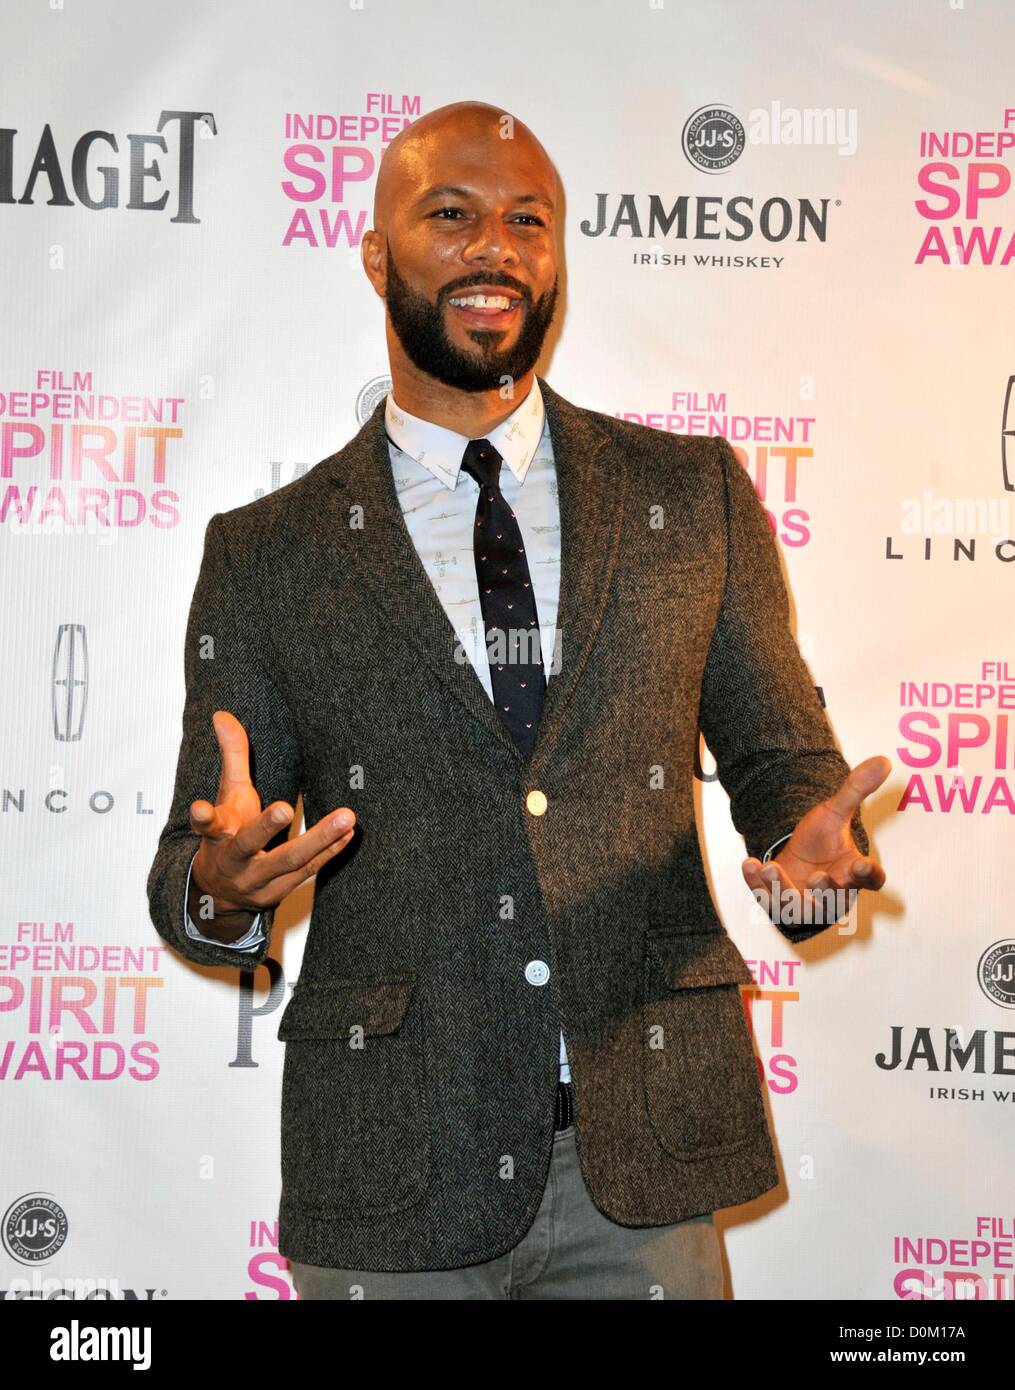 Los Angeles, USA. 27th November 2012. Lonnie Rashid Lynn Jr. 'Common' at the press conference for 2013 Film Independent Spirit Award Nominations Announcement, The W Hotel Hollywood, Los Angeles, CA November 27, 2012. Photo By: Dee Cercone/Everett Collection Stock Photo